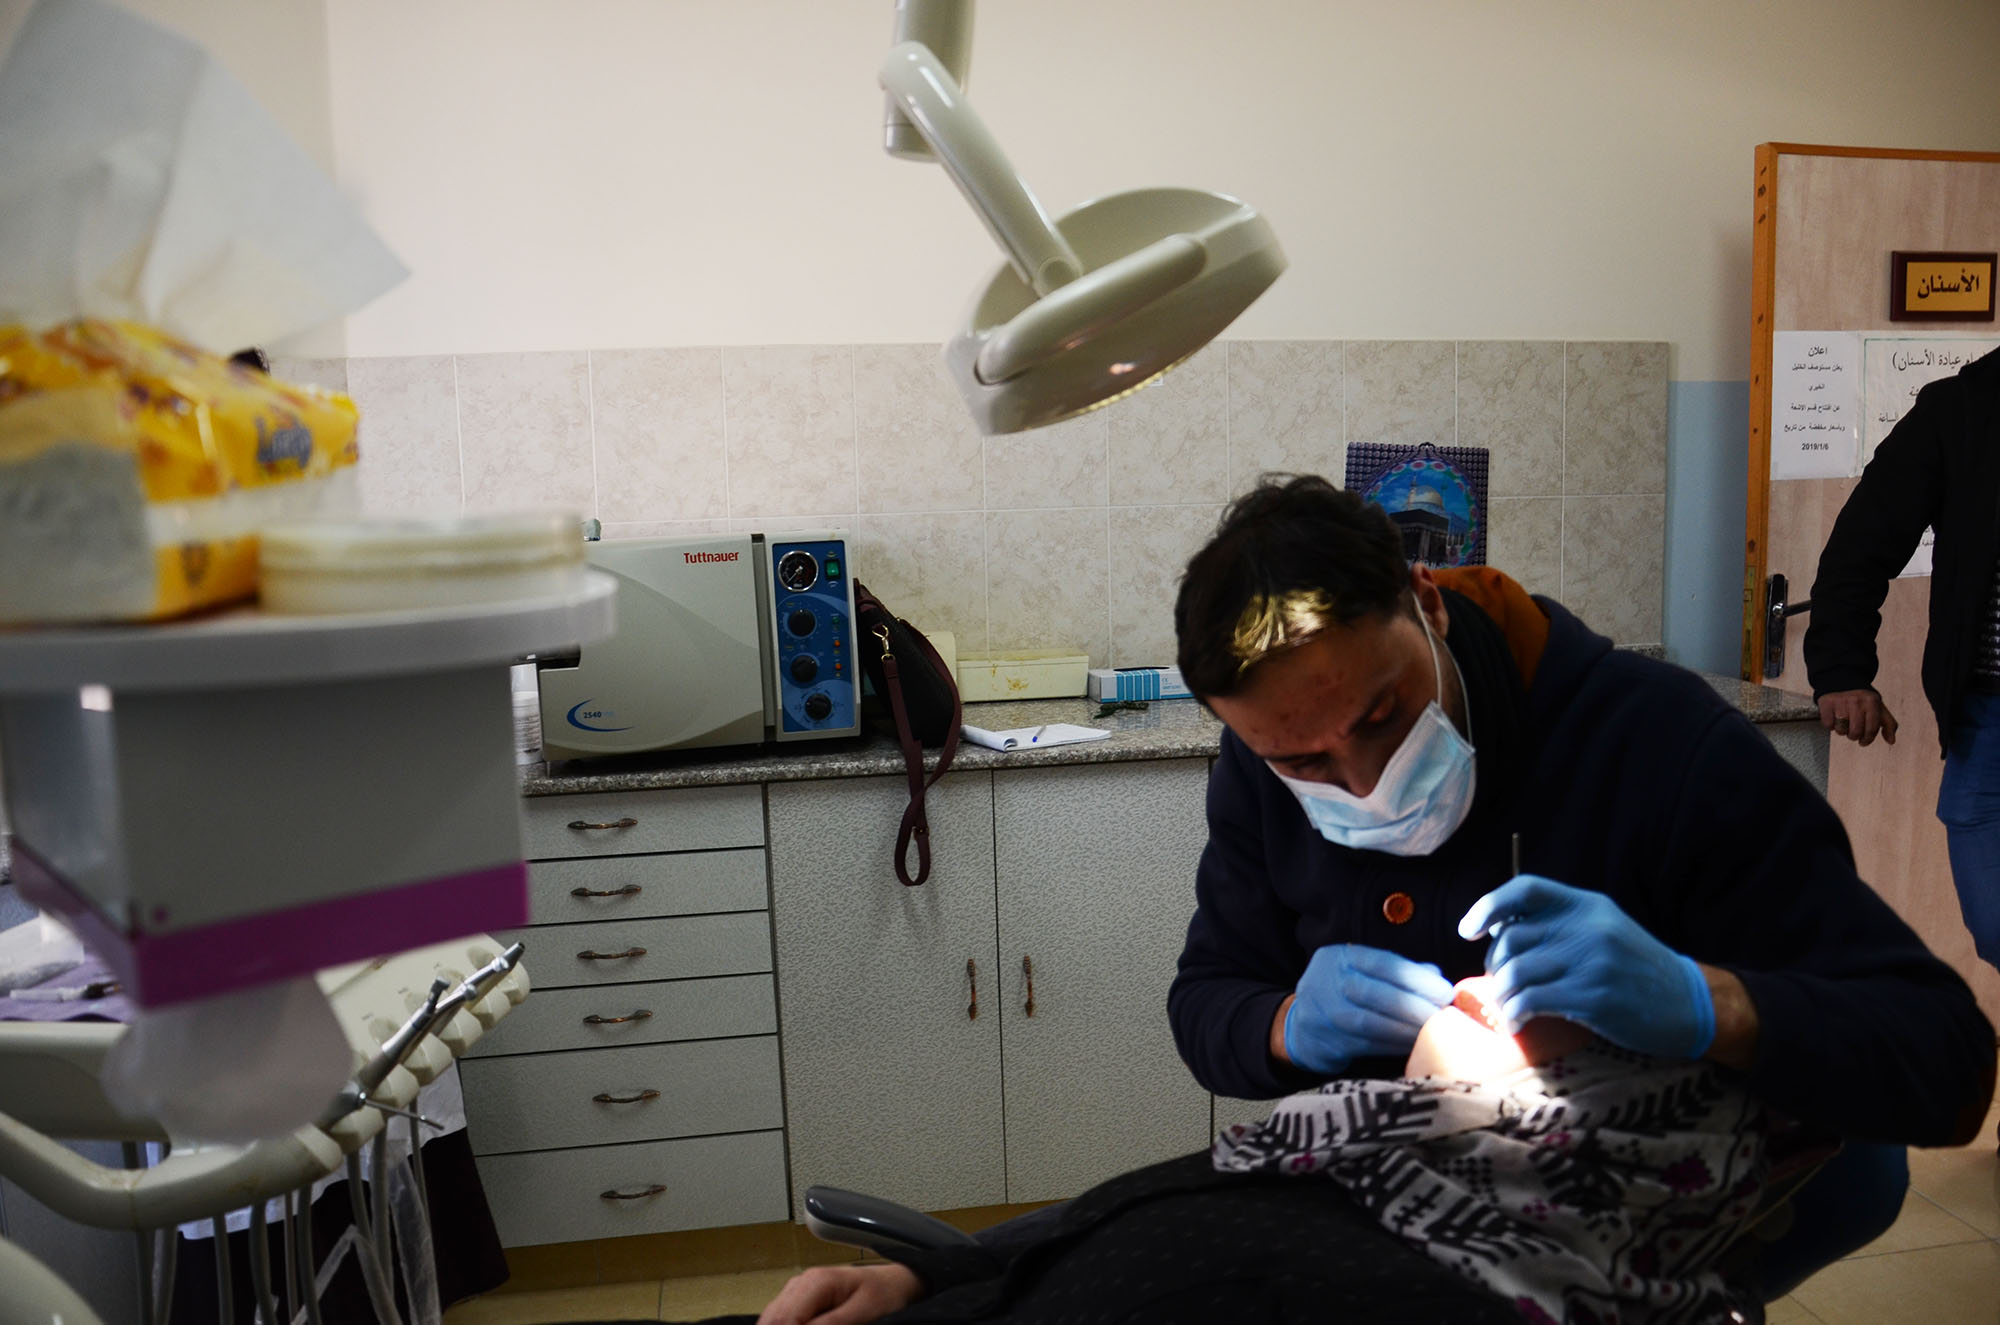 Samia being examined by the dentist.